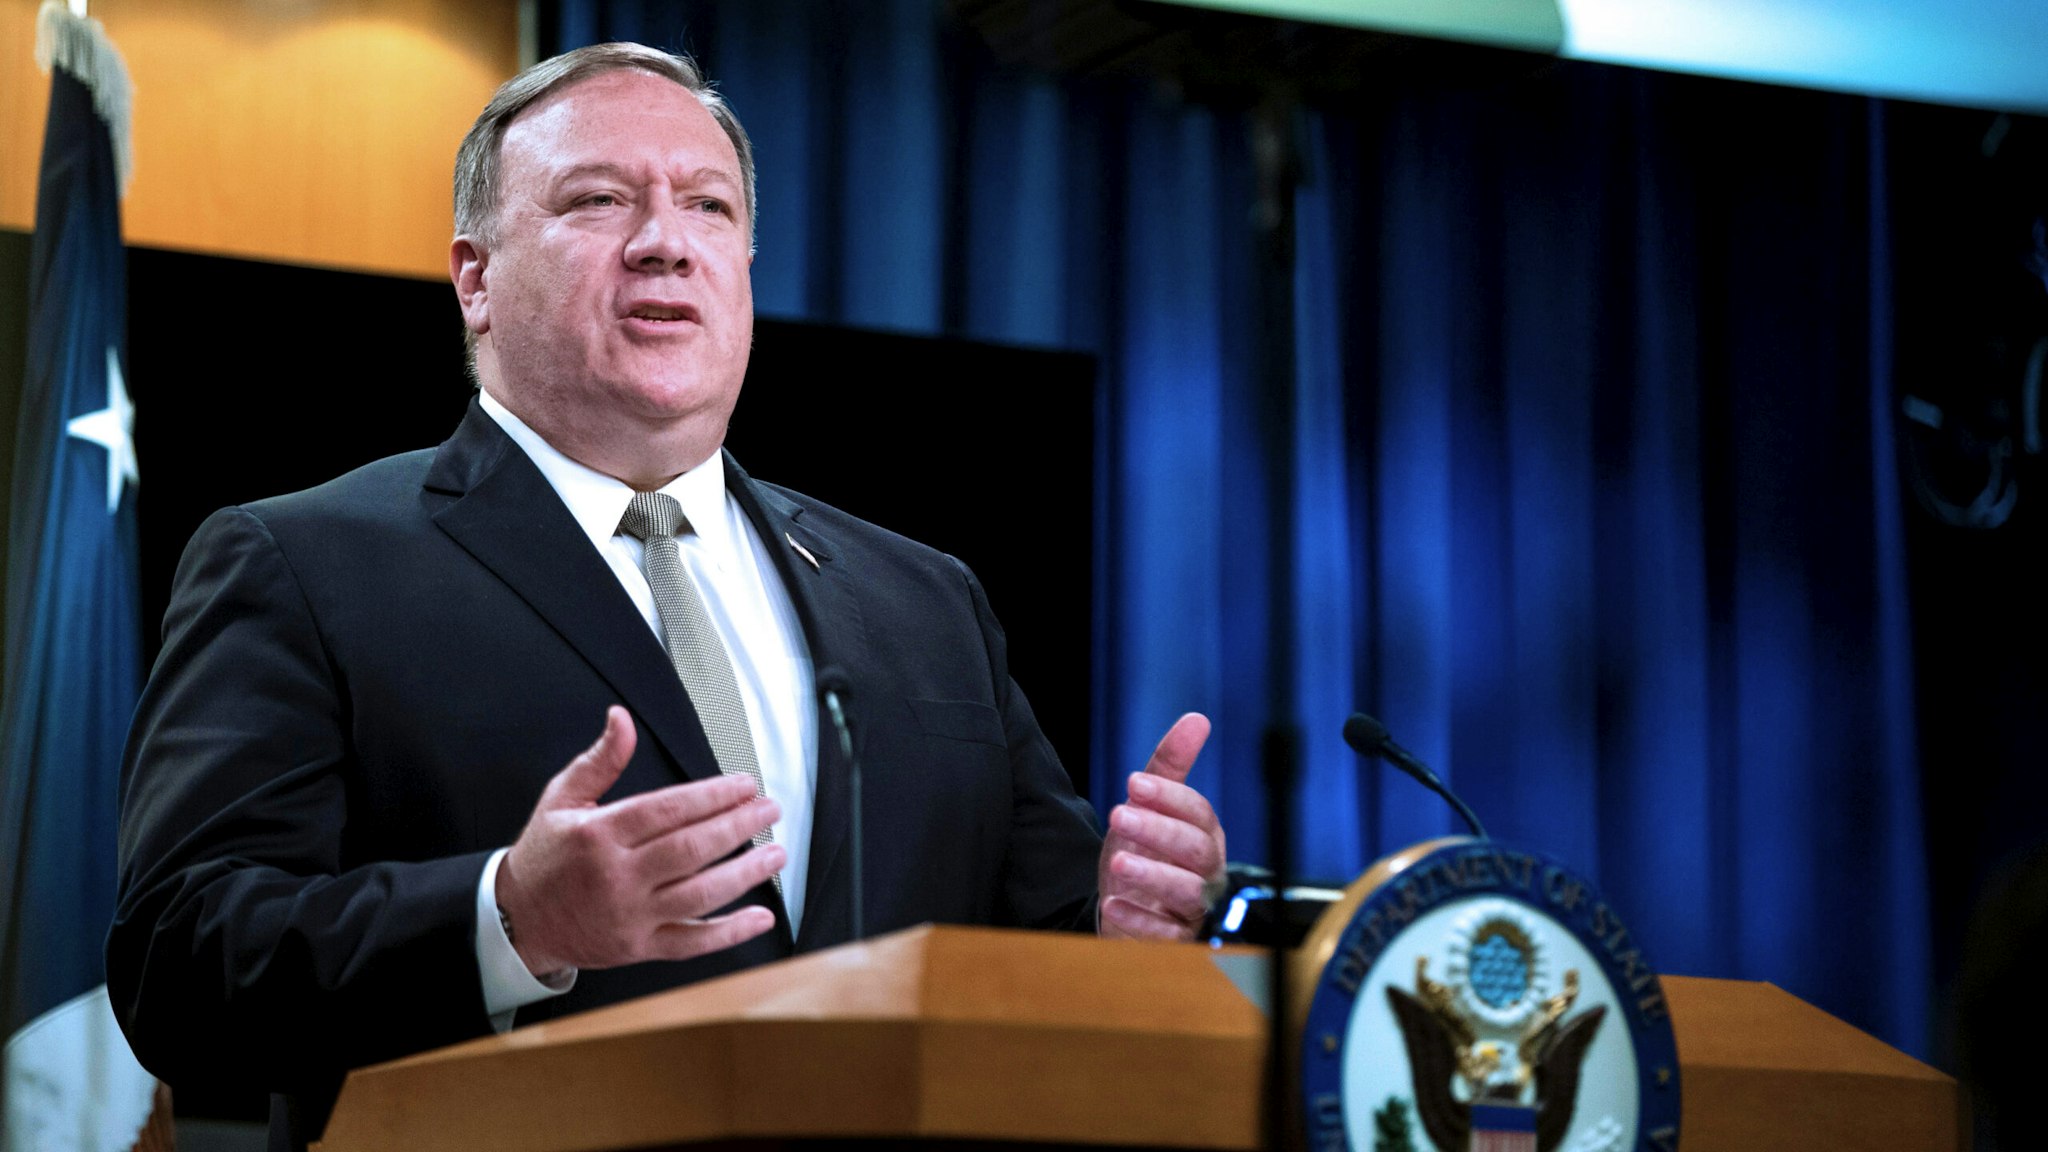 US Secretary of State Mike Pompeo, speaks during a news conference at the State Department,on July 1, 2020, in Washington, DC. - Secretary of State Mike Pompeo on Wednesday left the door open to President Vladimir Putin attending a US summit but insisted the administration has been firm over Moscow's activities in Afghanistan. President Donald Trump "gets to decide if he wants him to come to a summit or not. That's his decision," Pompeo told reporters.